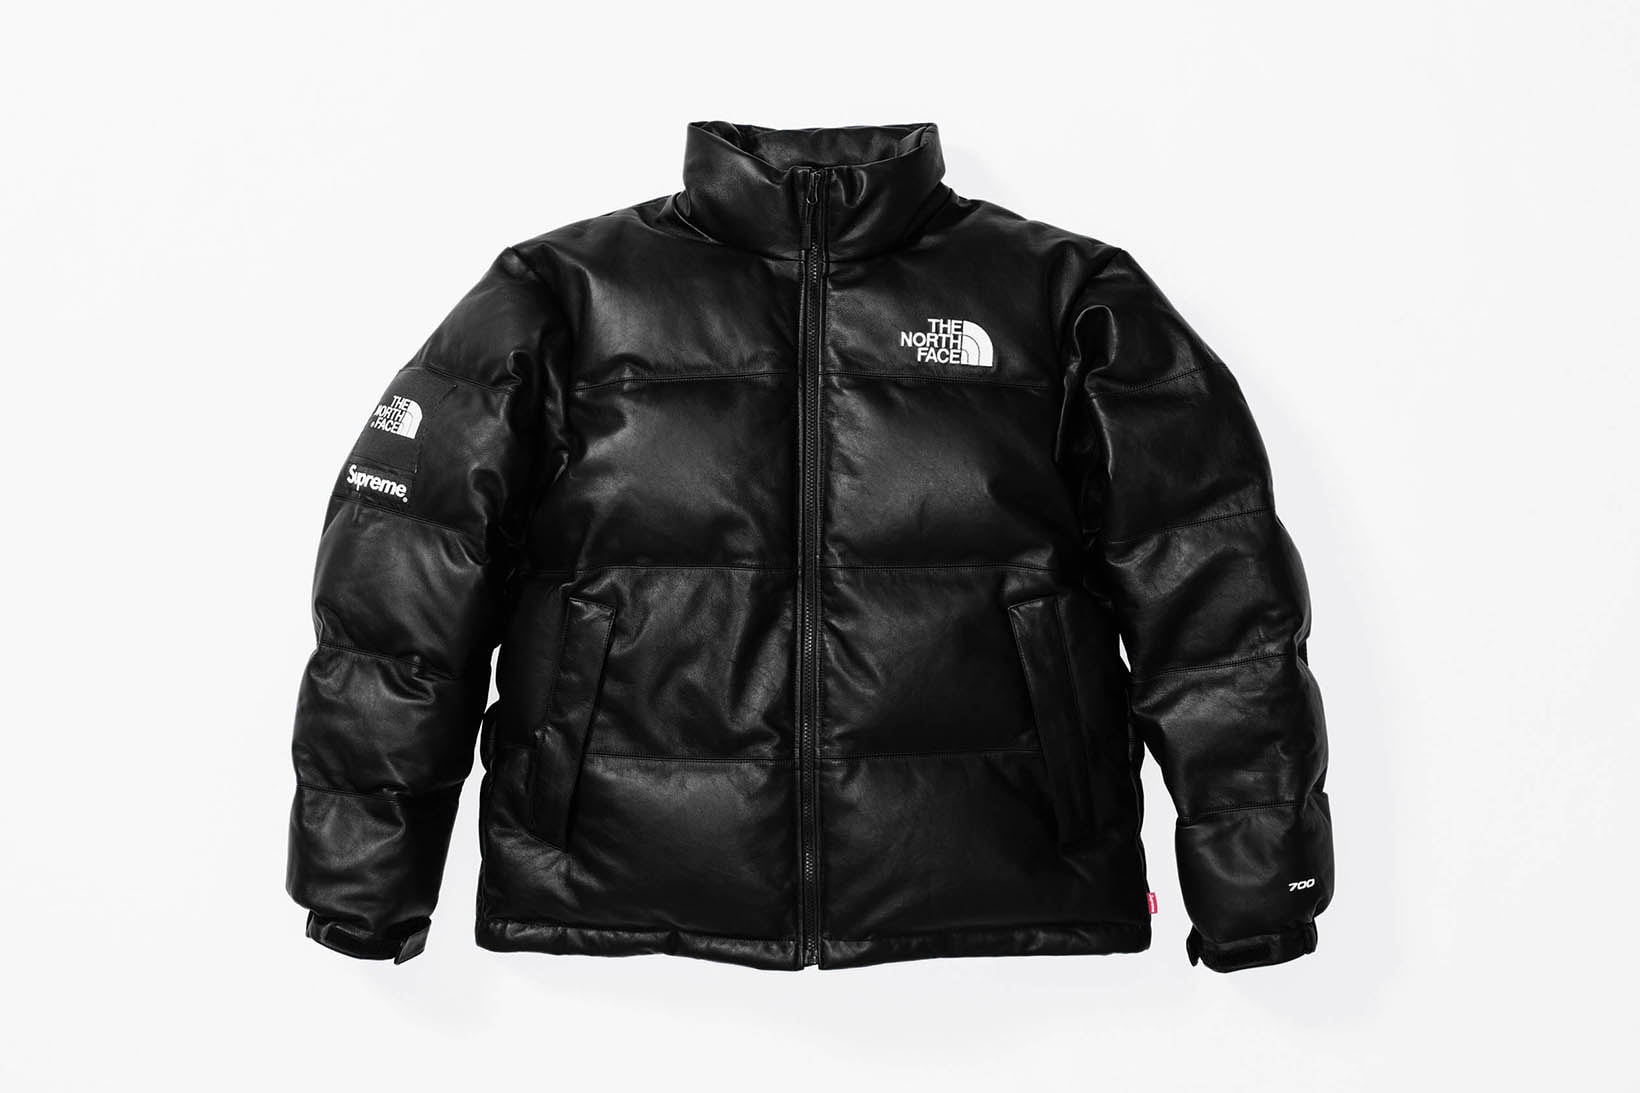 Supreme x The North Face 2017 Fall Black Jacket